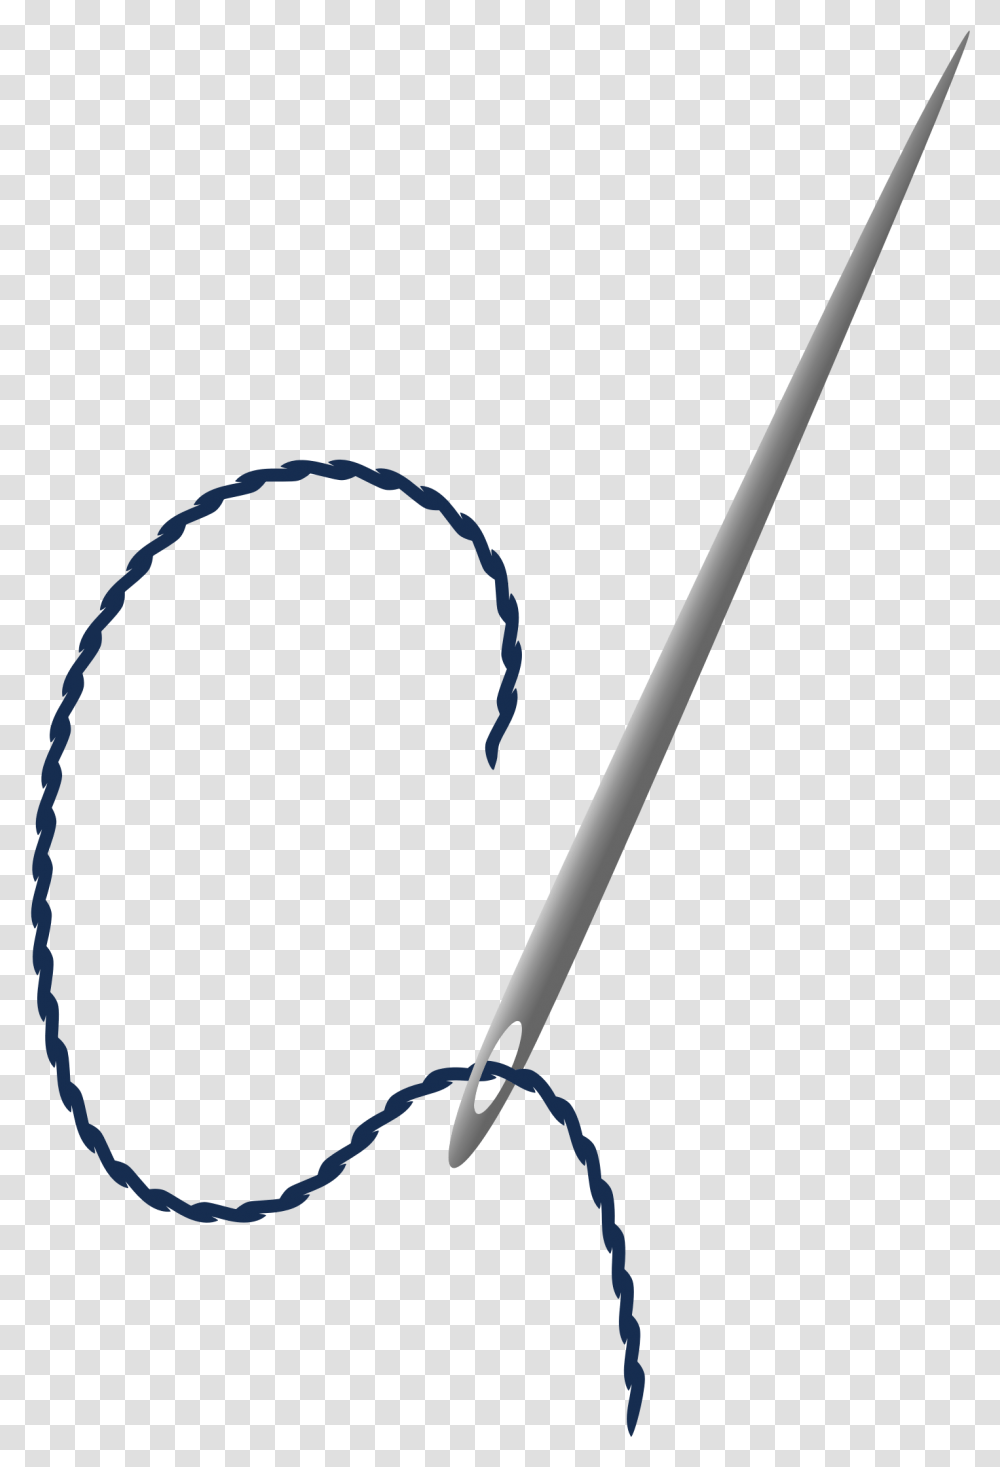 Needle Sewing Needle With Thread Clipart Full Size Draw Needle And Thread, Weapon, Weaponry, Wand, Whip Transparent Png